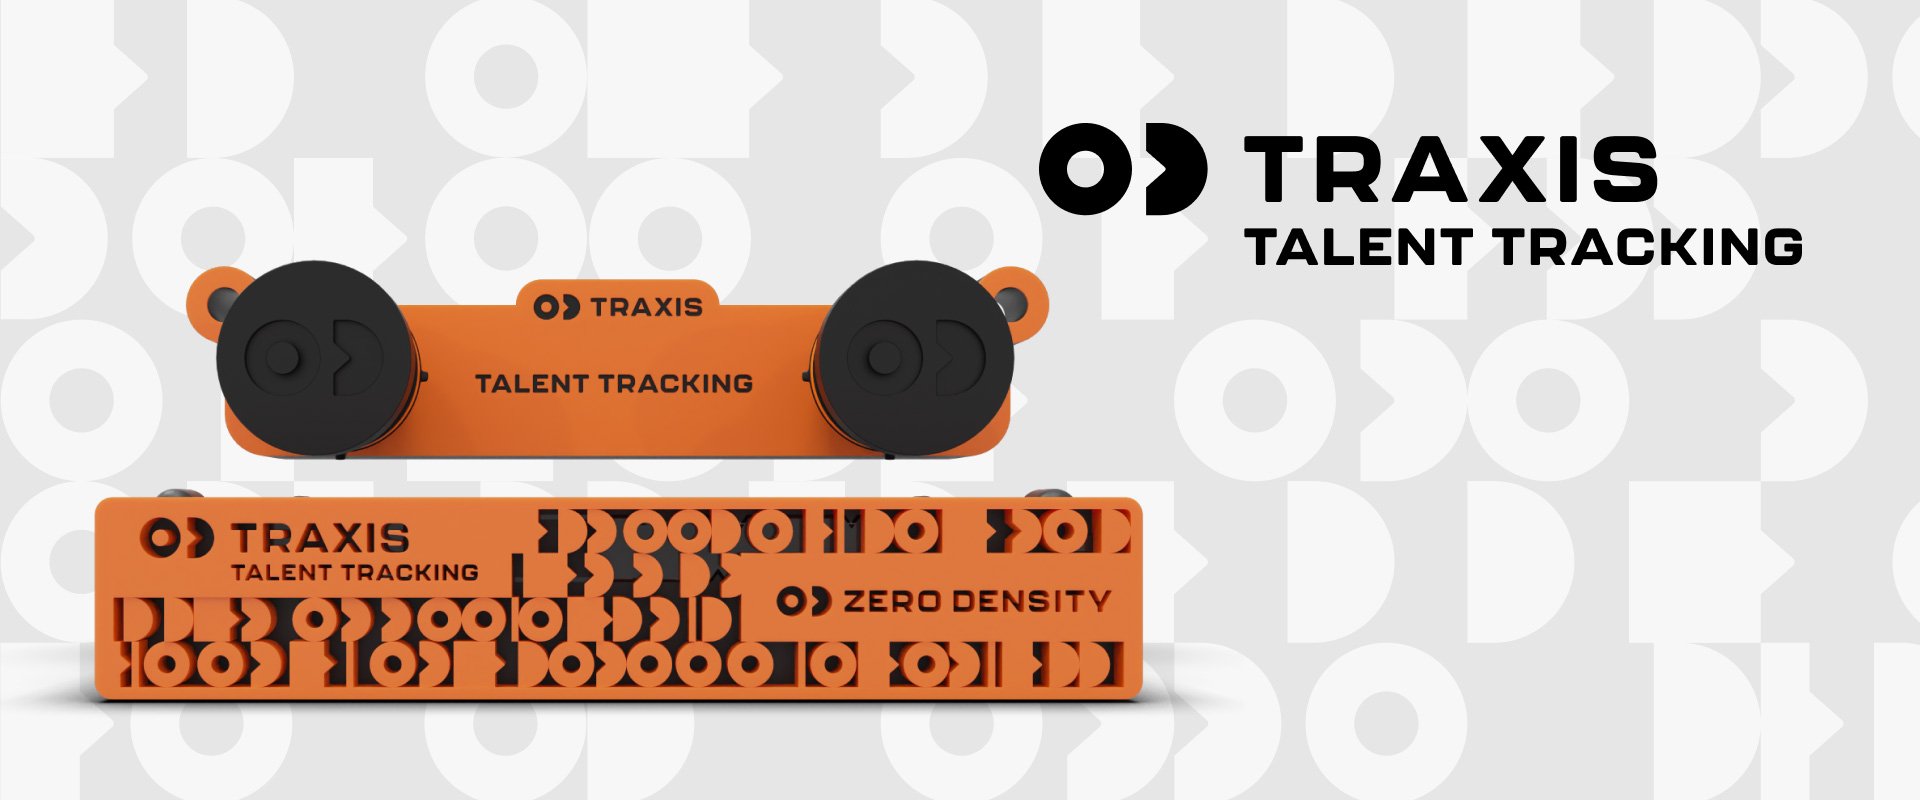 Traxis-Talent-Tracking